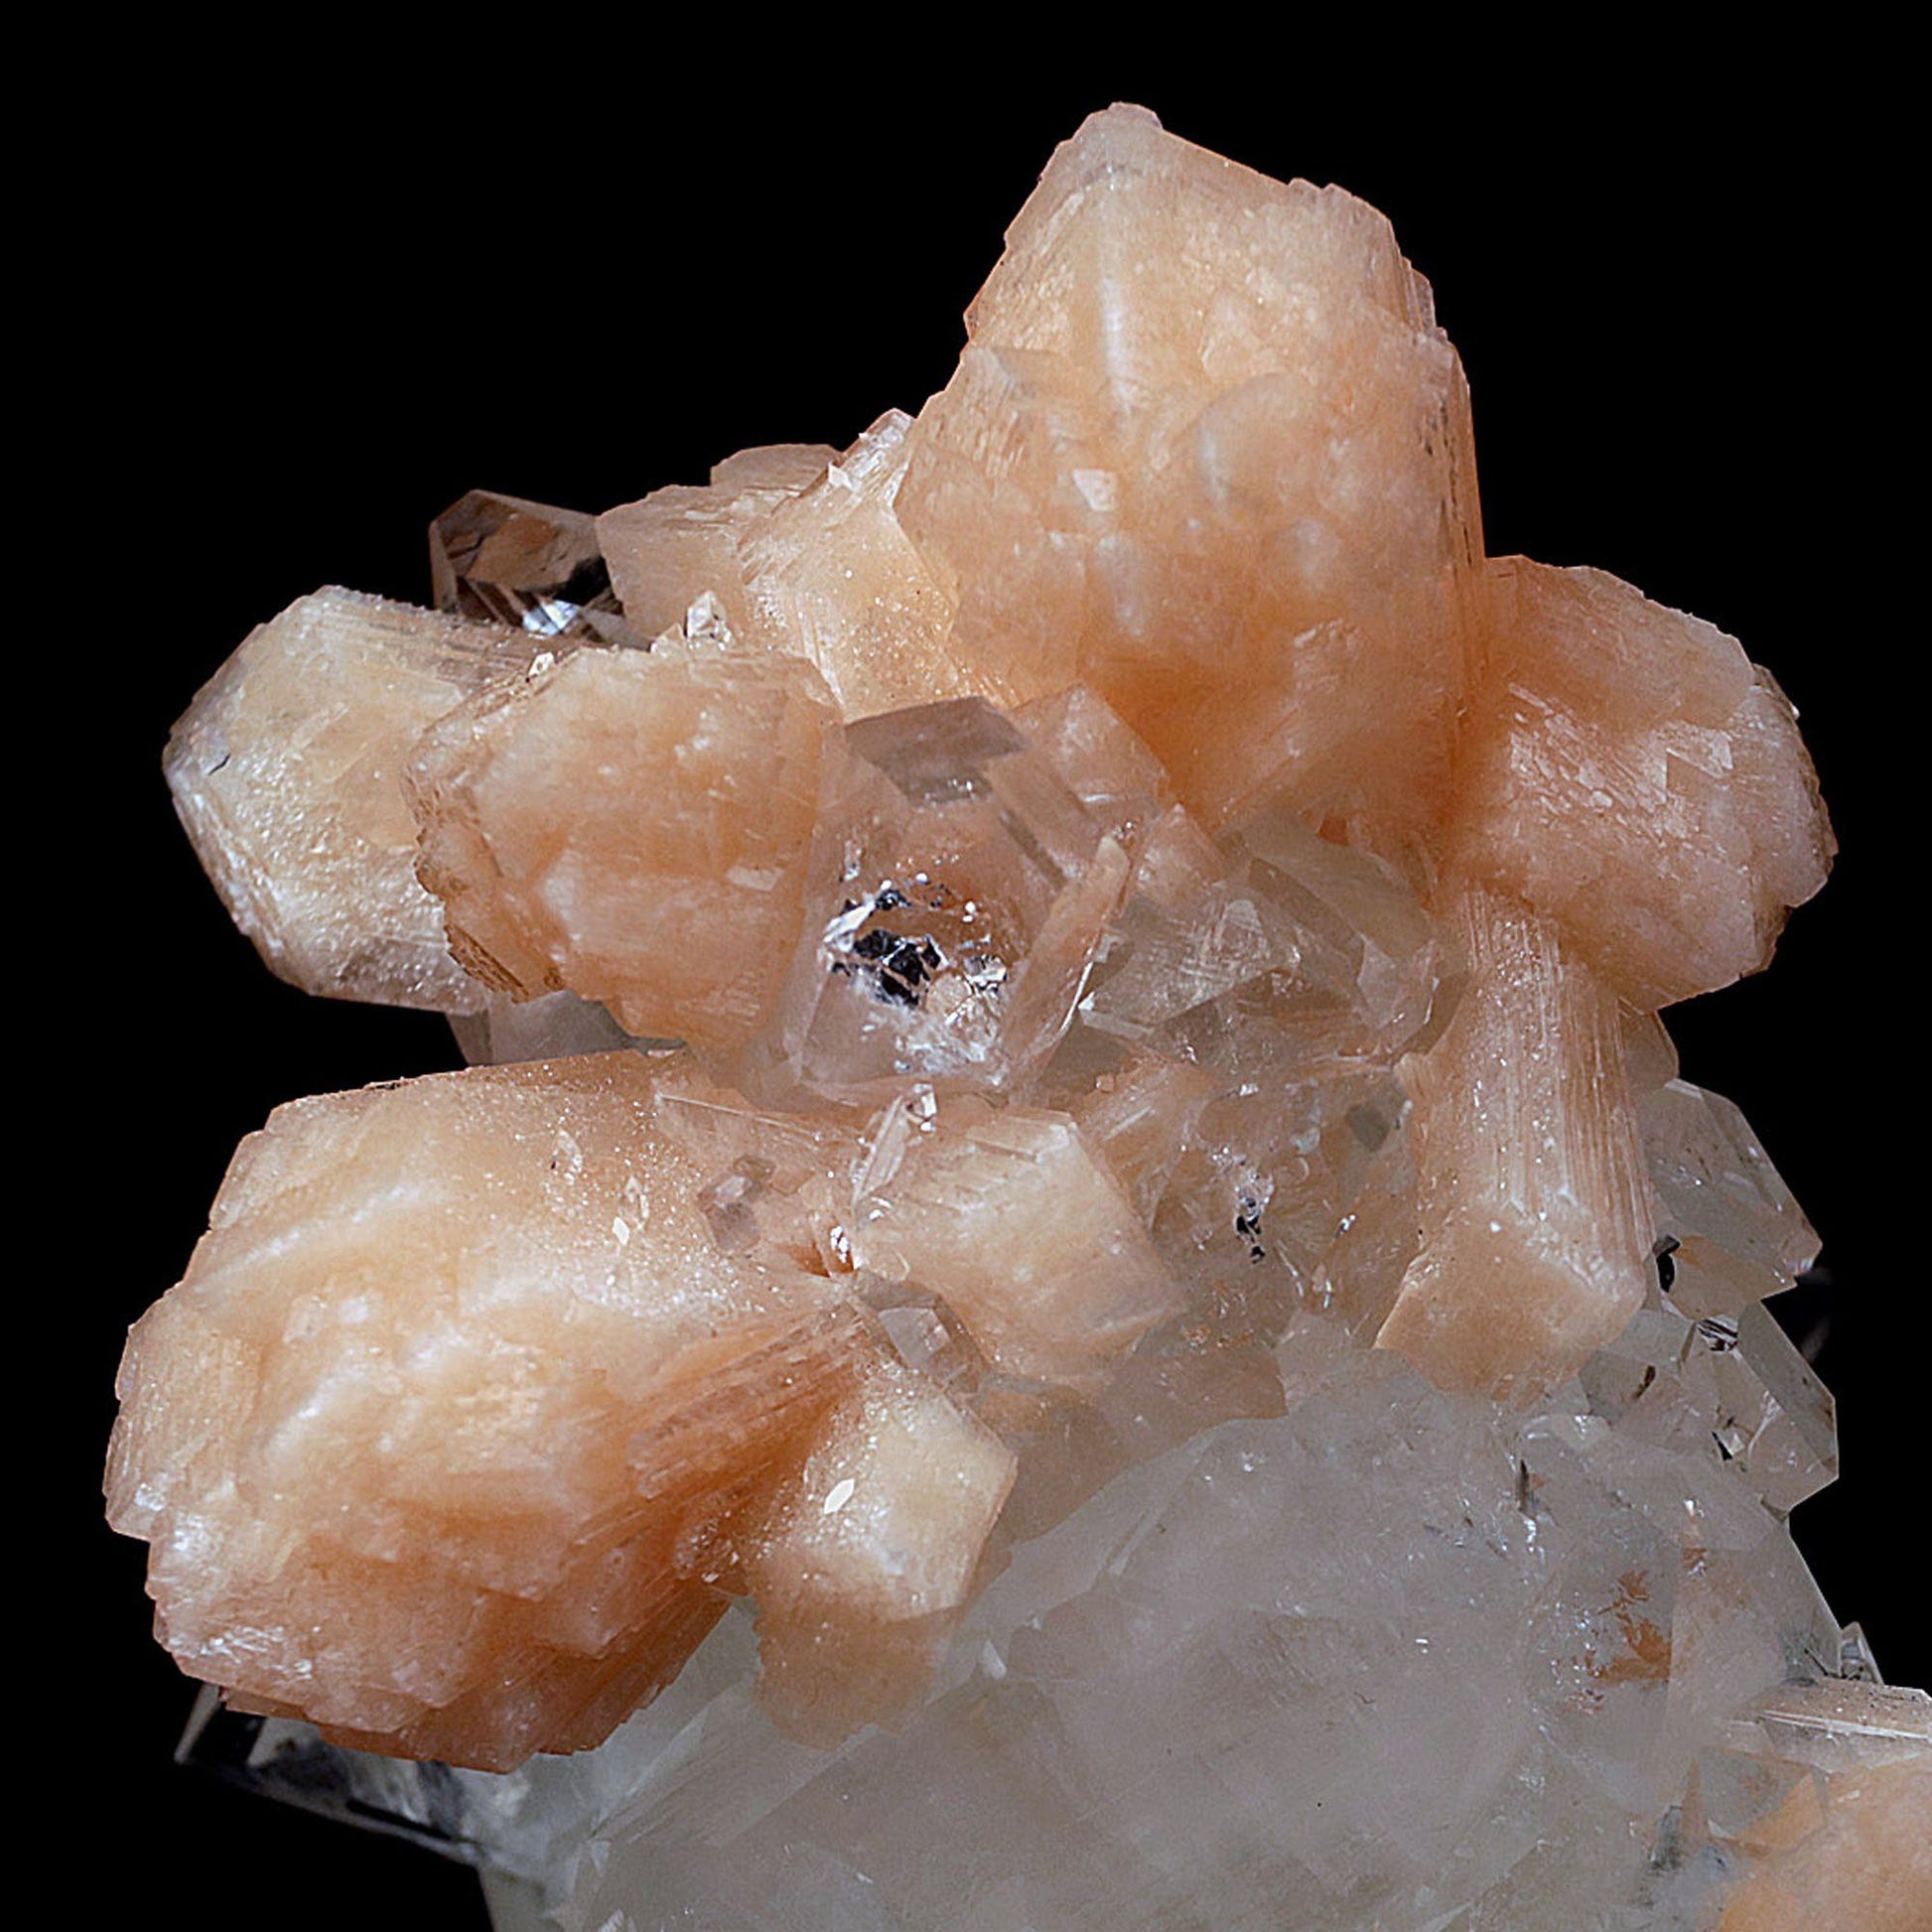 Peach Stilbite on Sprakling Apophyllite Crystals Natural Mineral Speci…  https://www.superbminerals.us/products/peach-stilbite-on-sprakling-apophyllite-crystals-natural-mineral-specimen-b-4054  Features:Classic combination specimen from the basalt trap rock quarries of India featuring a Fluorapophyllite crystal cluster with a Stilbite bowtie! While common in general, this is really a special piece - more beautiful and sparkly than most. The Fluorapophyllite is glassy, transparent to translucent